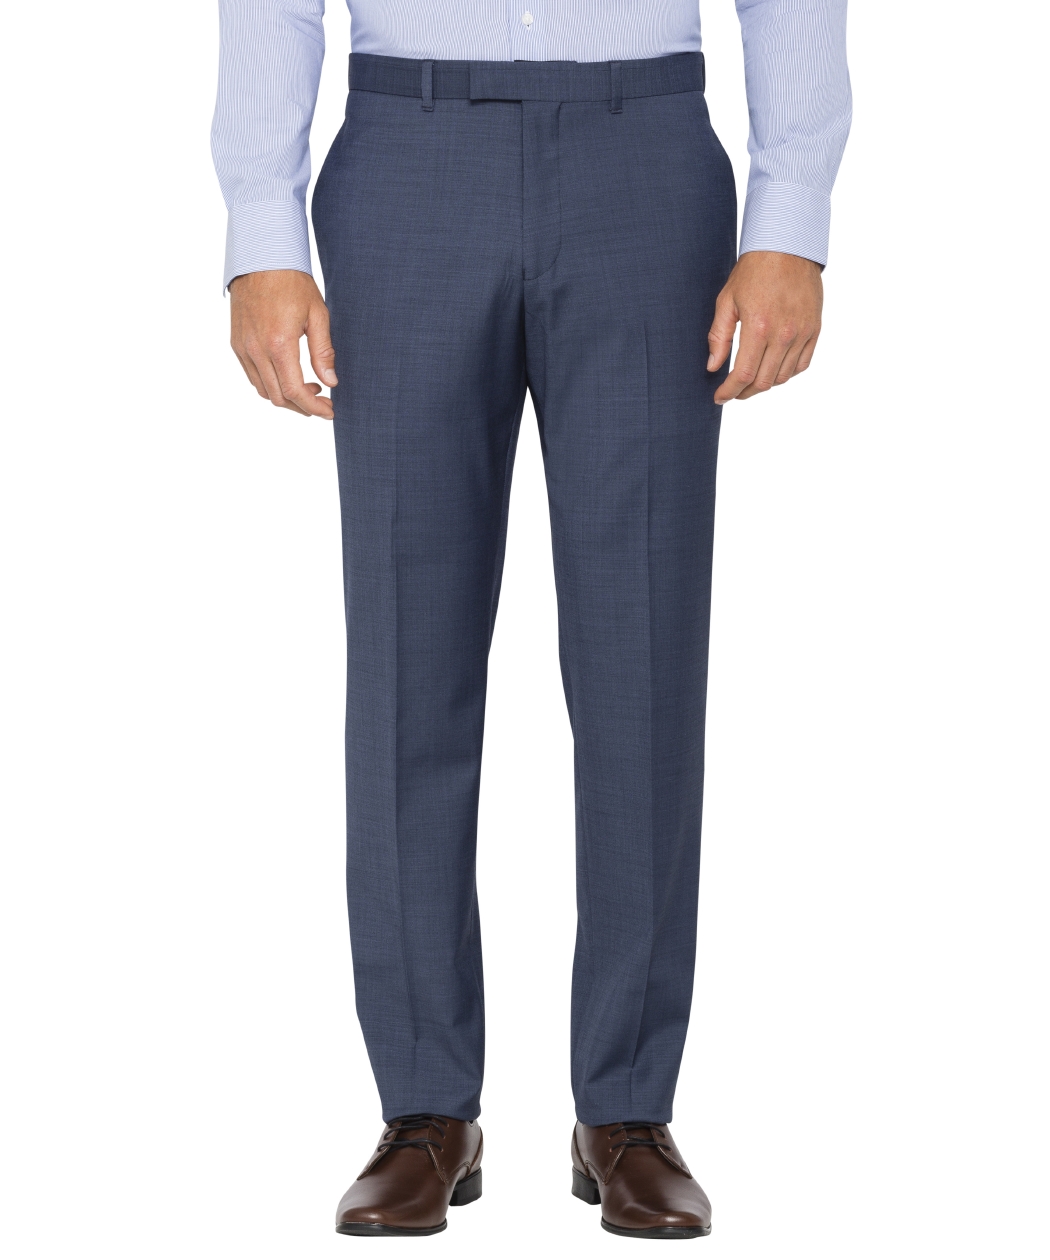 Suit Pants by Van Heusen Wool Stretch. Save up to 25%